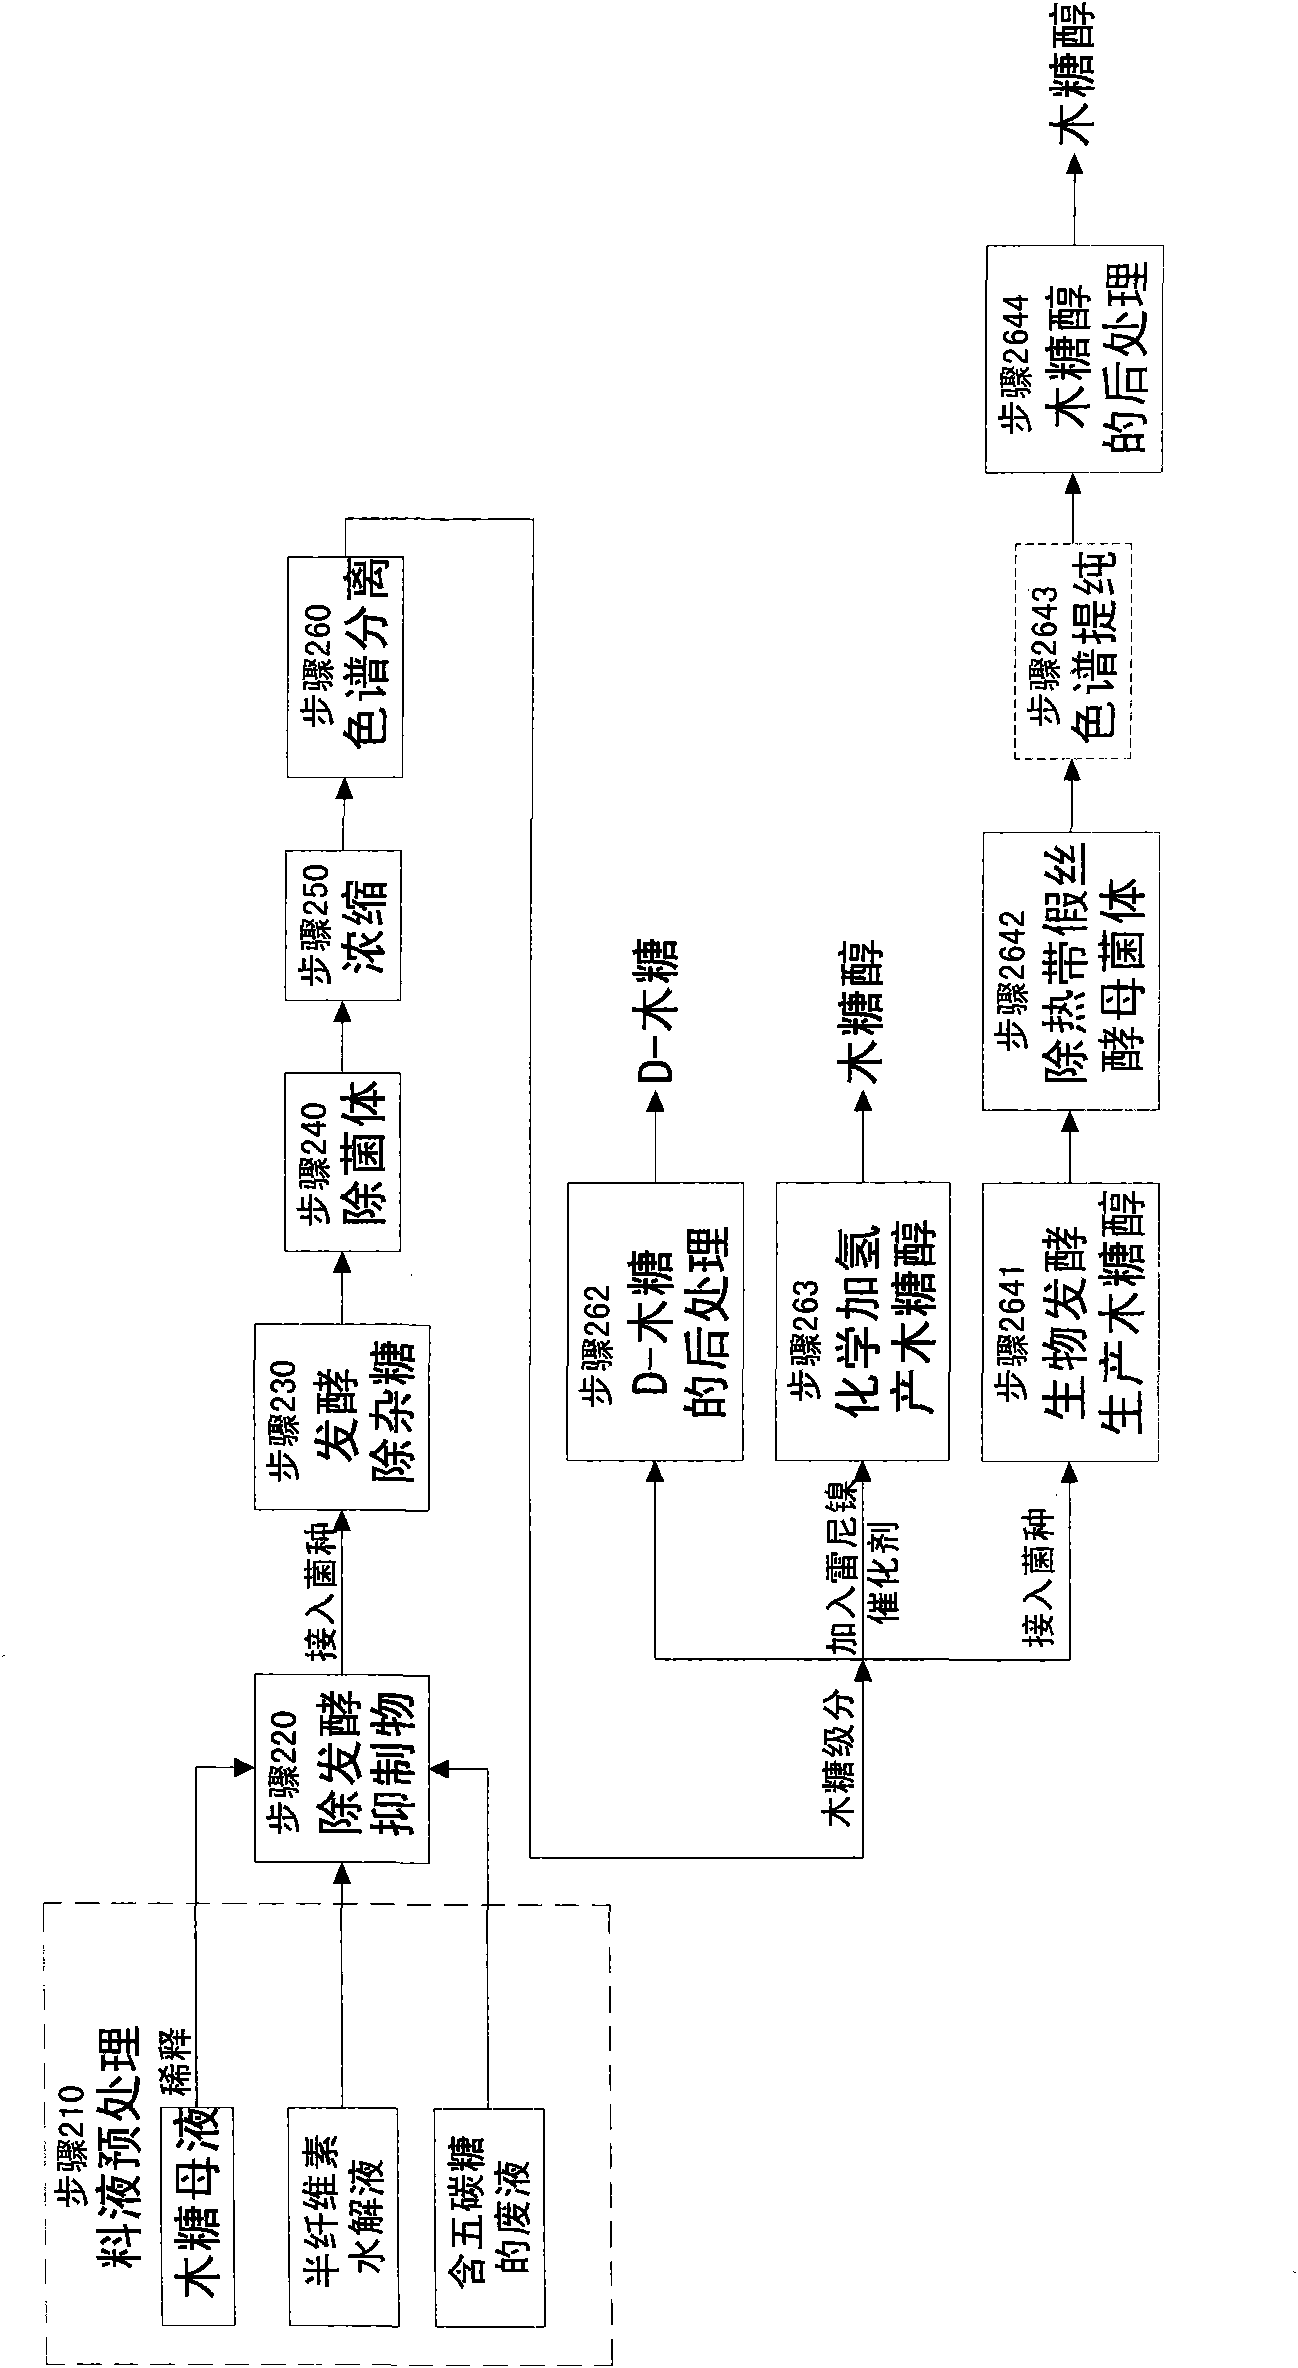 Method for producing wood sugar product